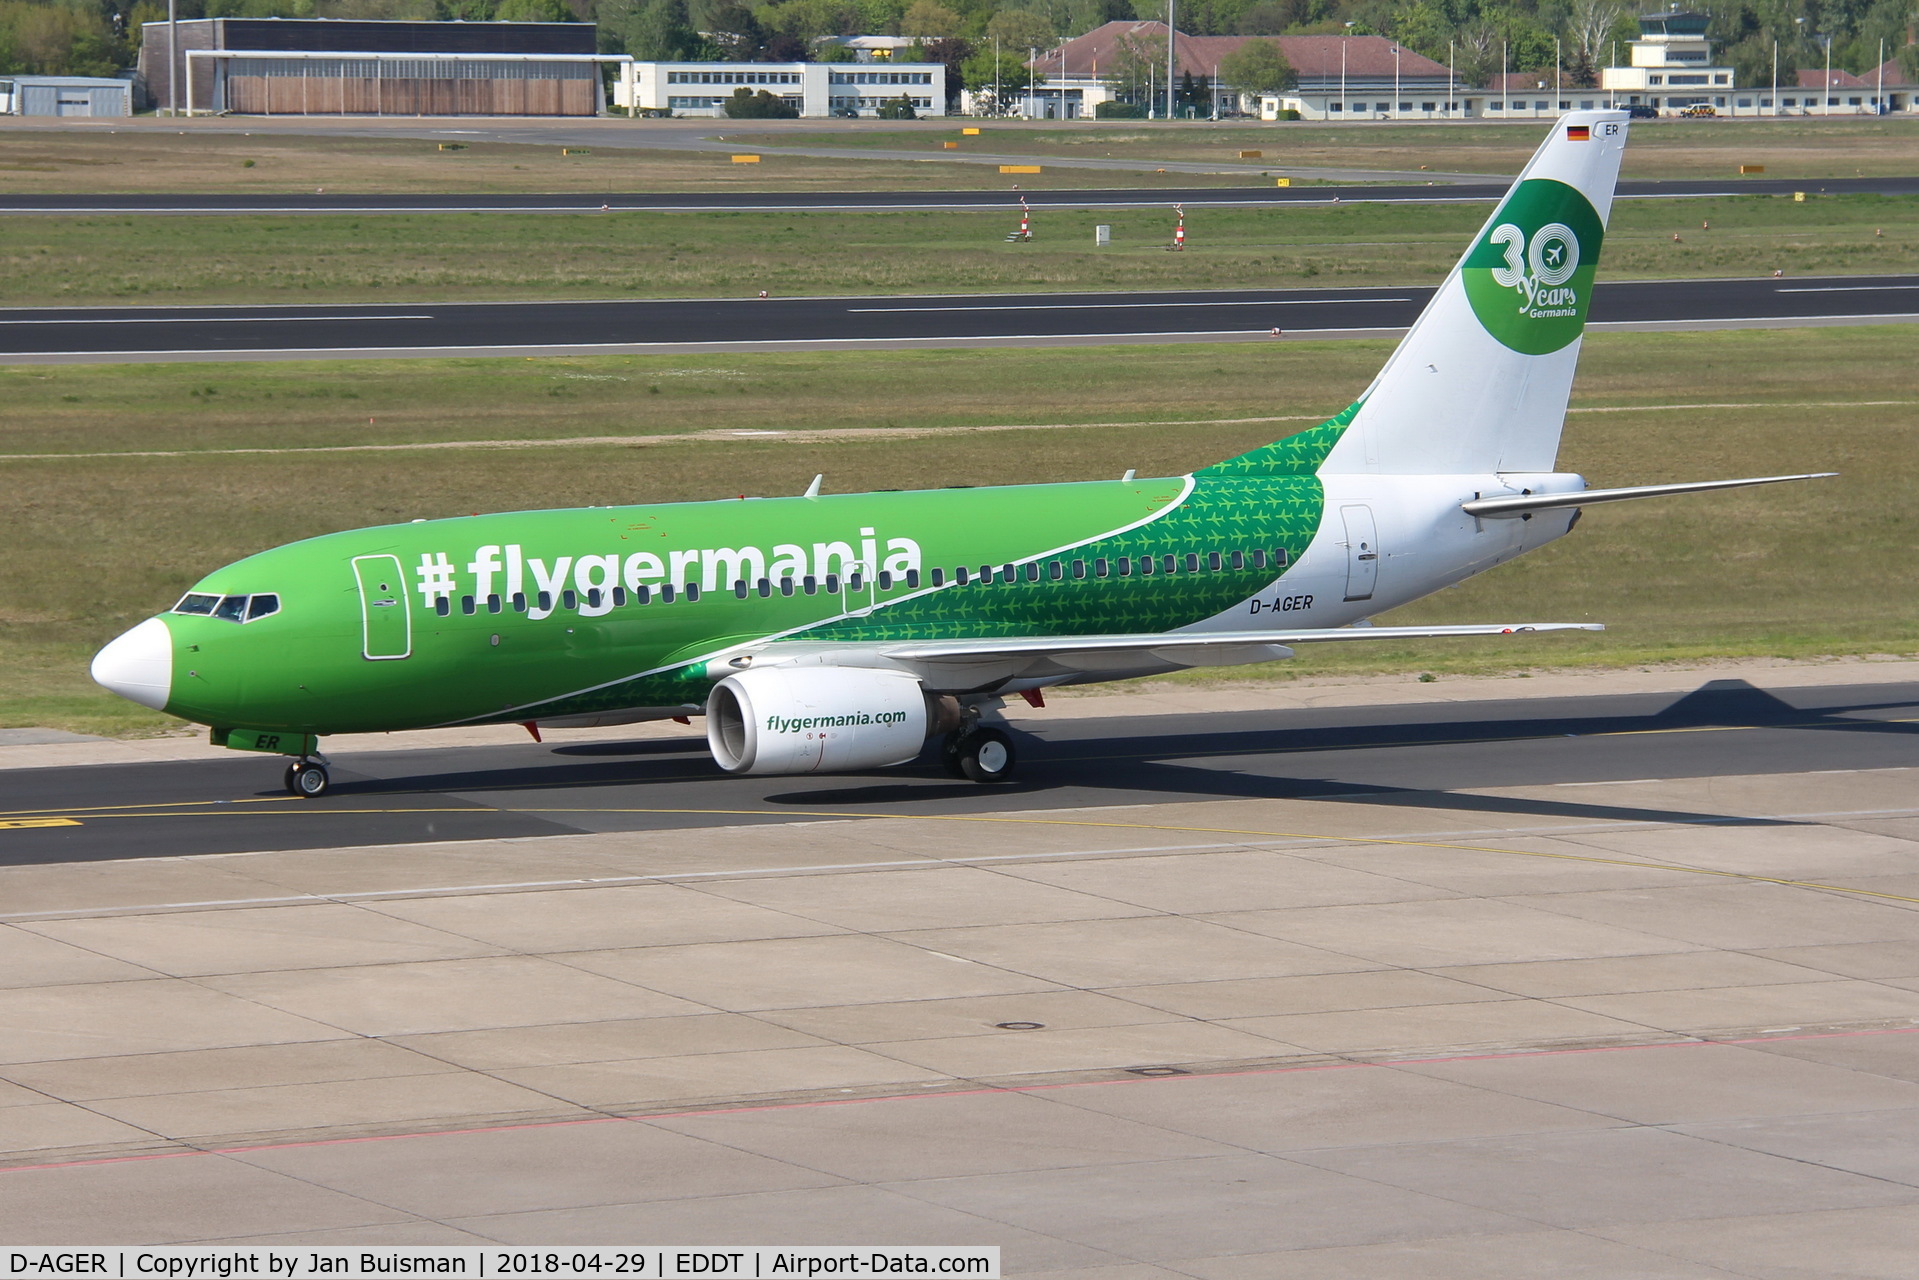 D-AGER, 1998 Boeing 737-75B C/N 28107, Germania, 30 year livery